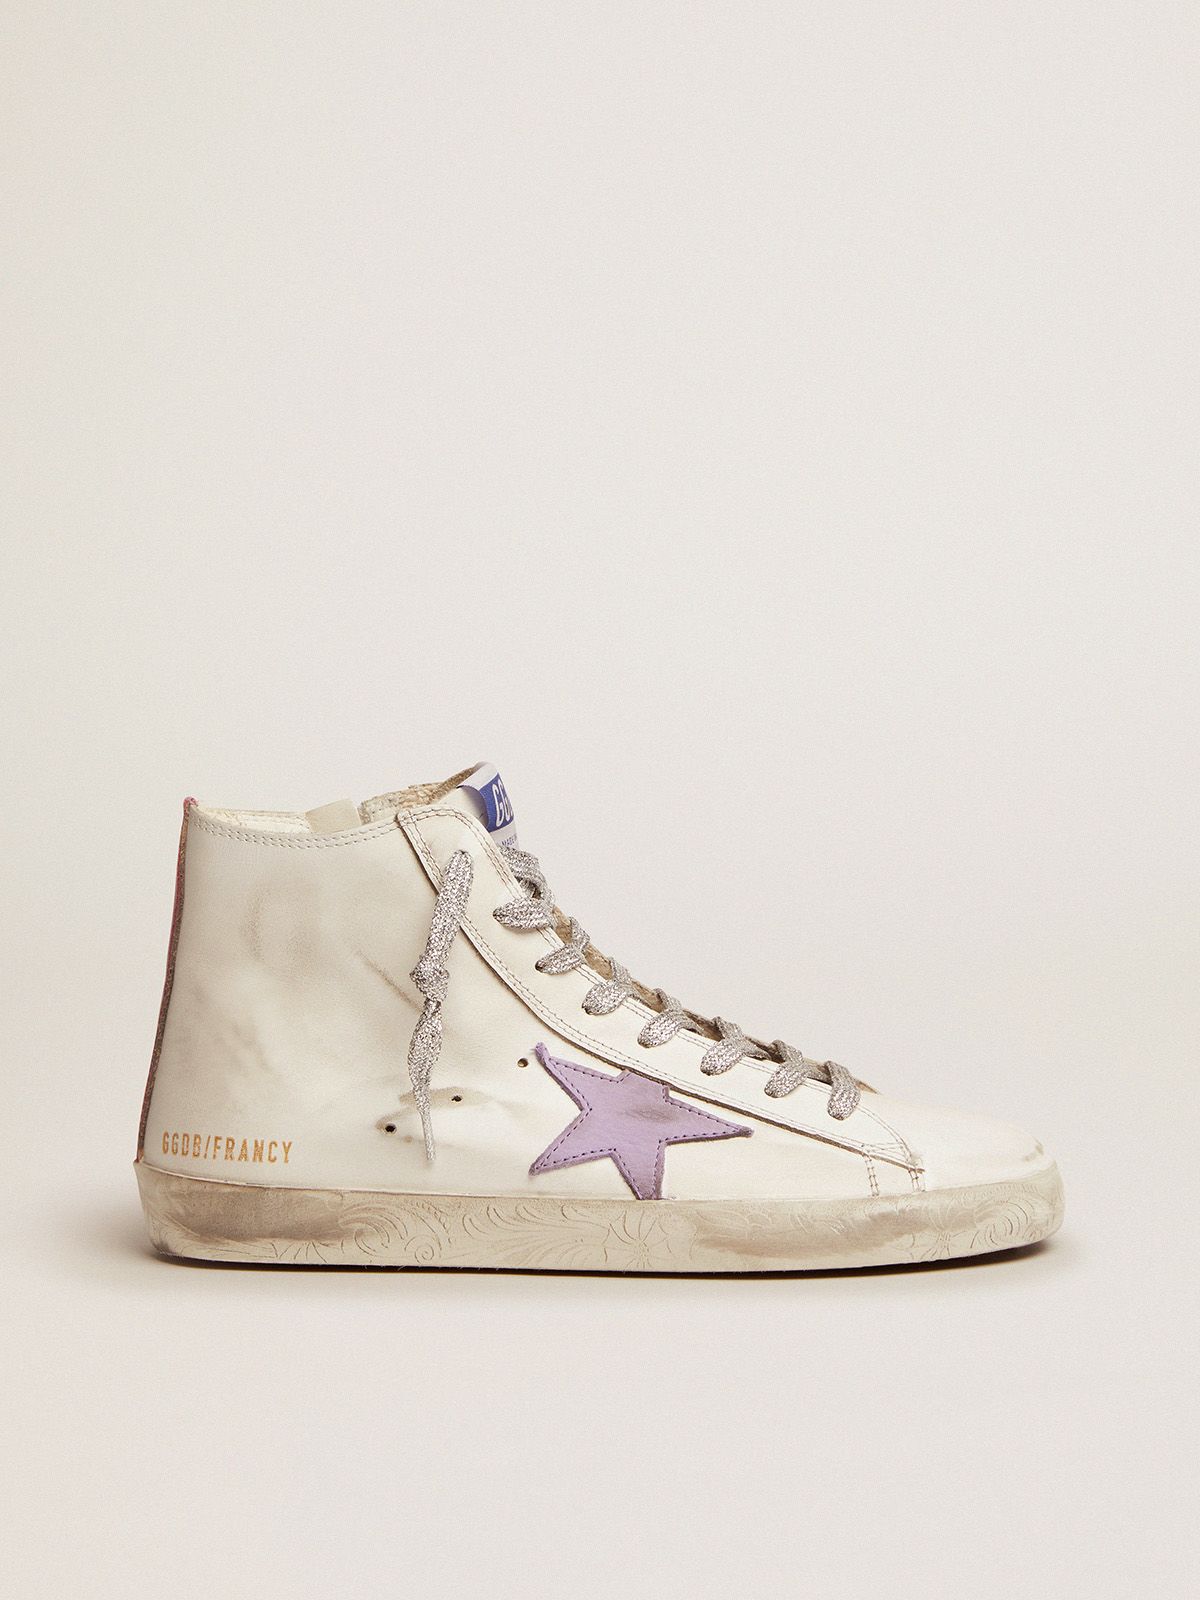 Francy sneakers with foxing with floral decorations and lavender-colored star